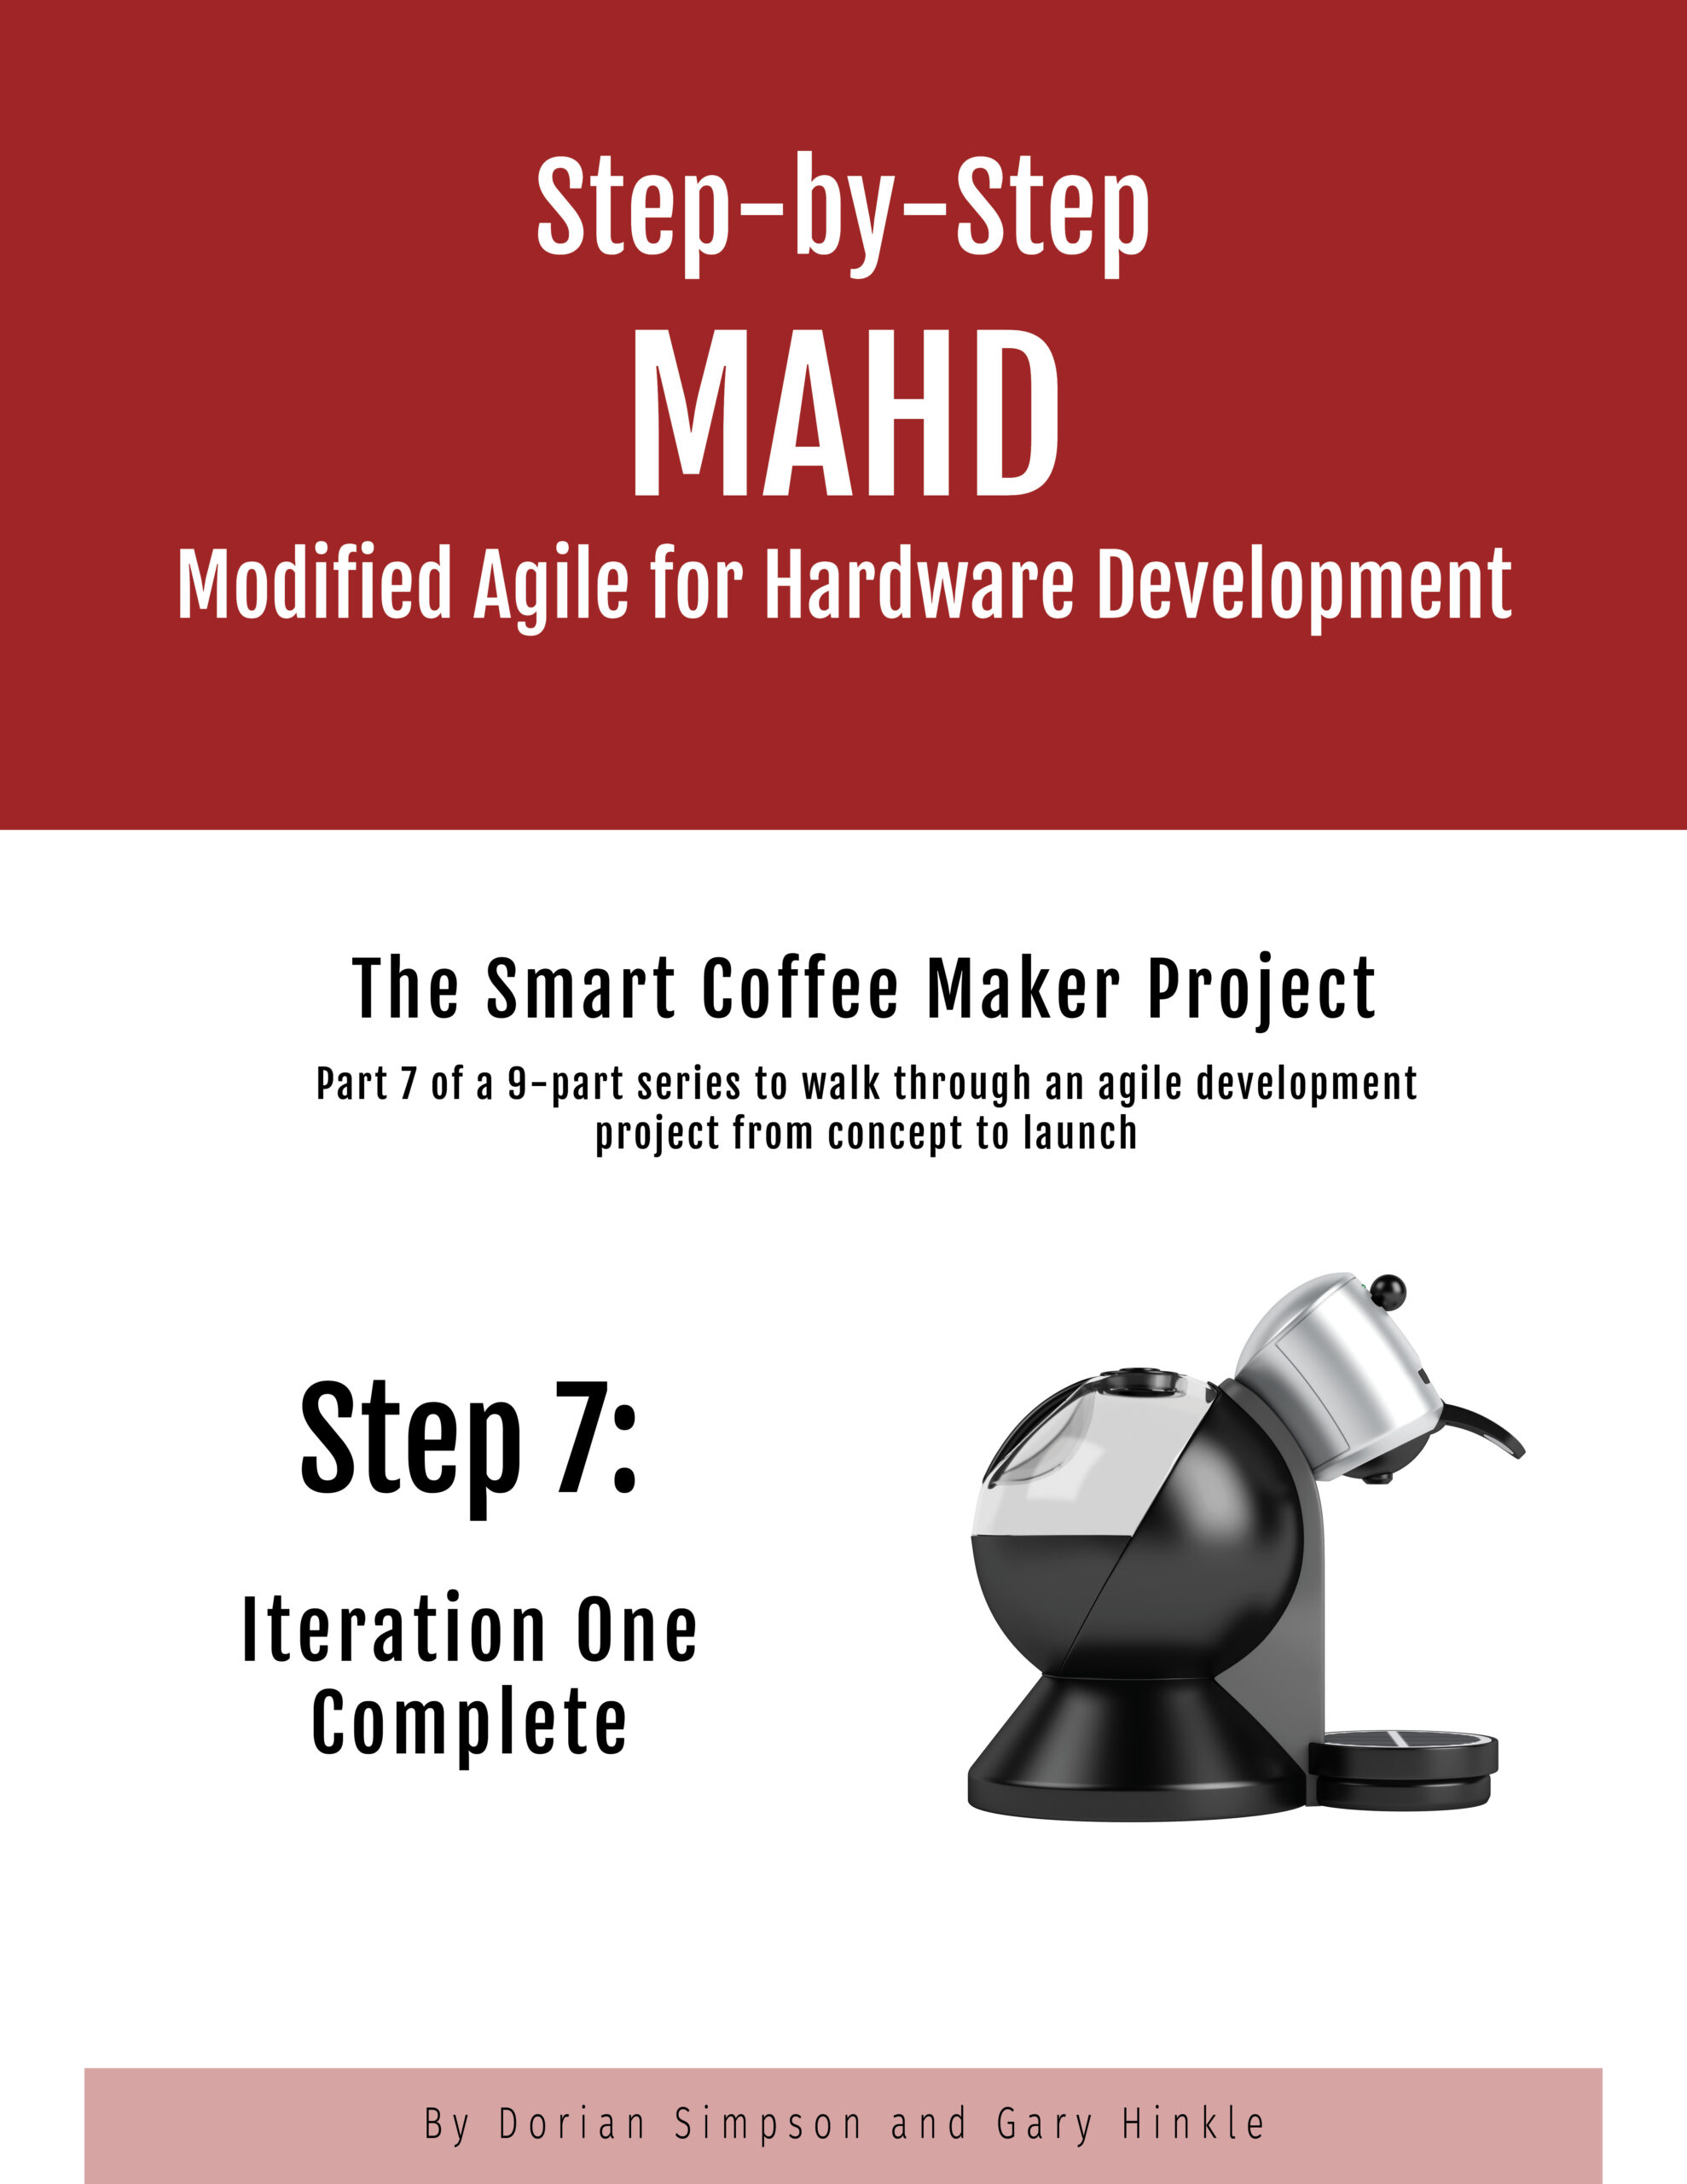 MAHD Step-by-Step Part 7 1st Iteration Compete